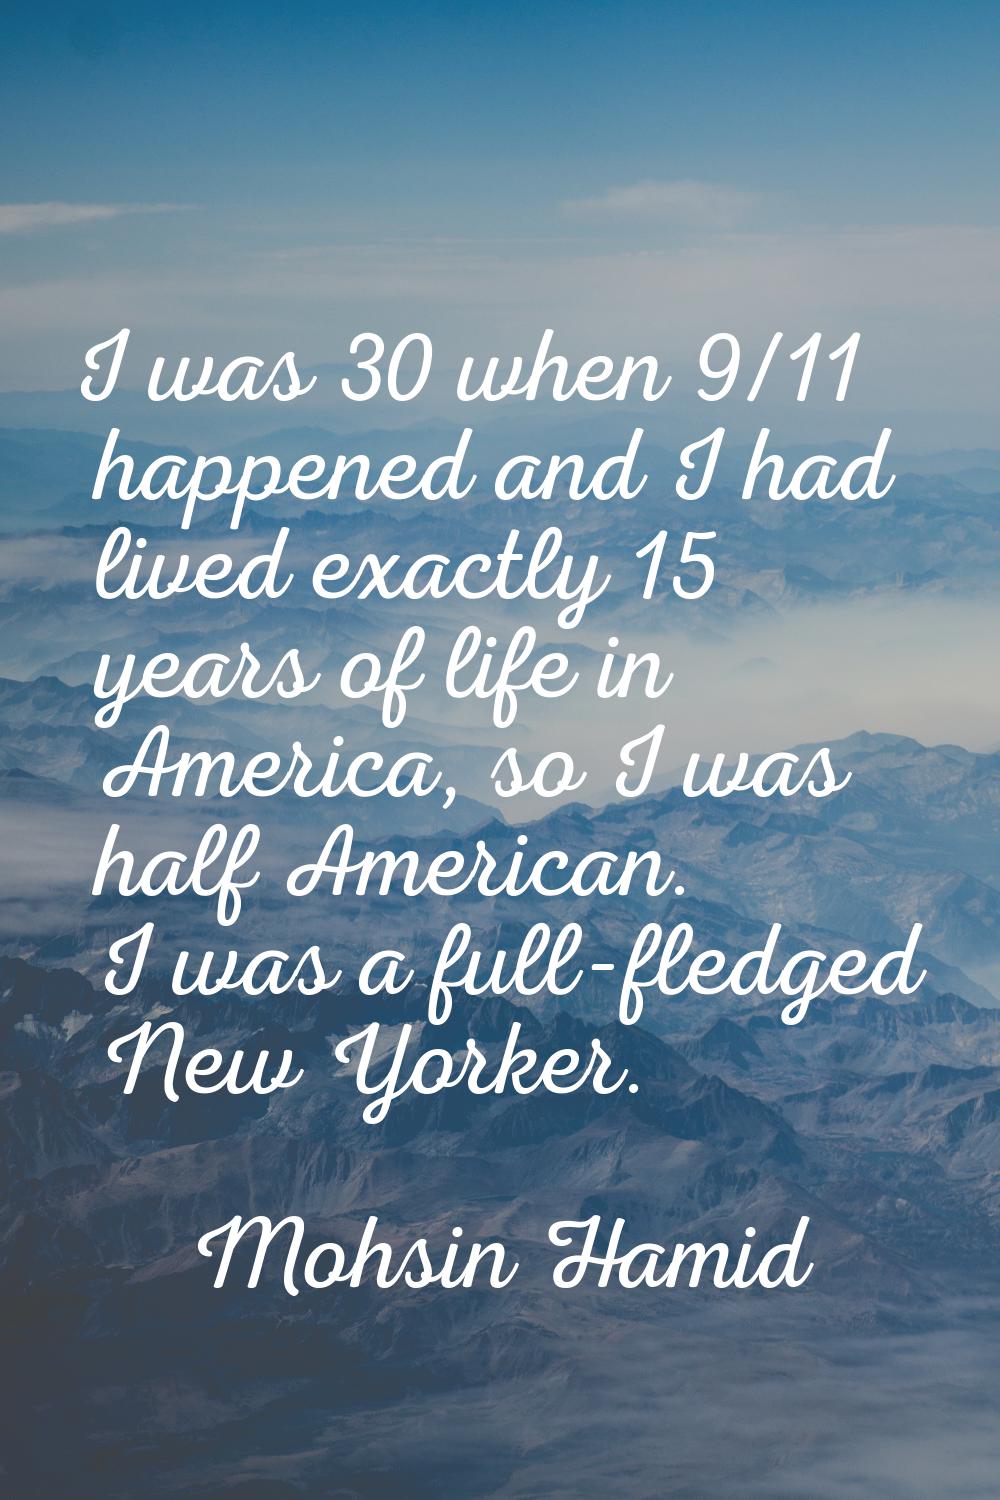 I was 30 when 9/11 happened and I had lived exactly 15 years of life in America, so I was half Amer